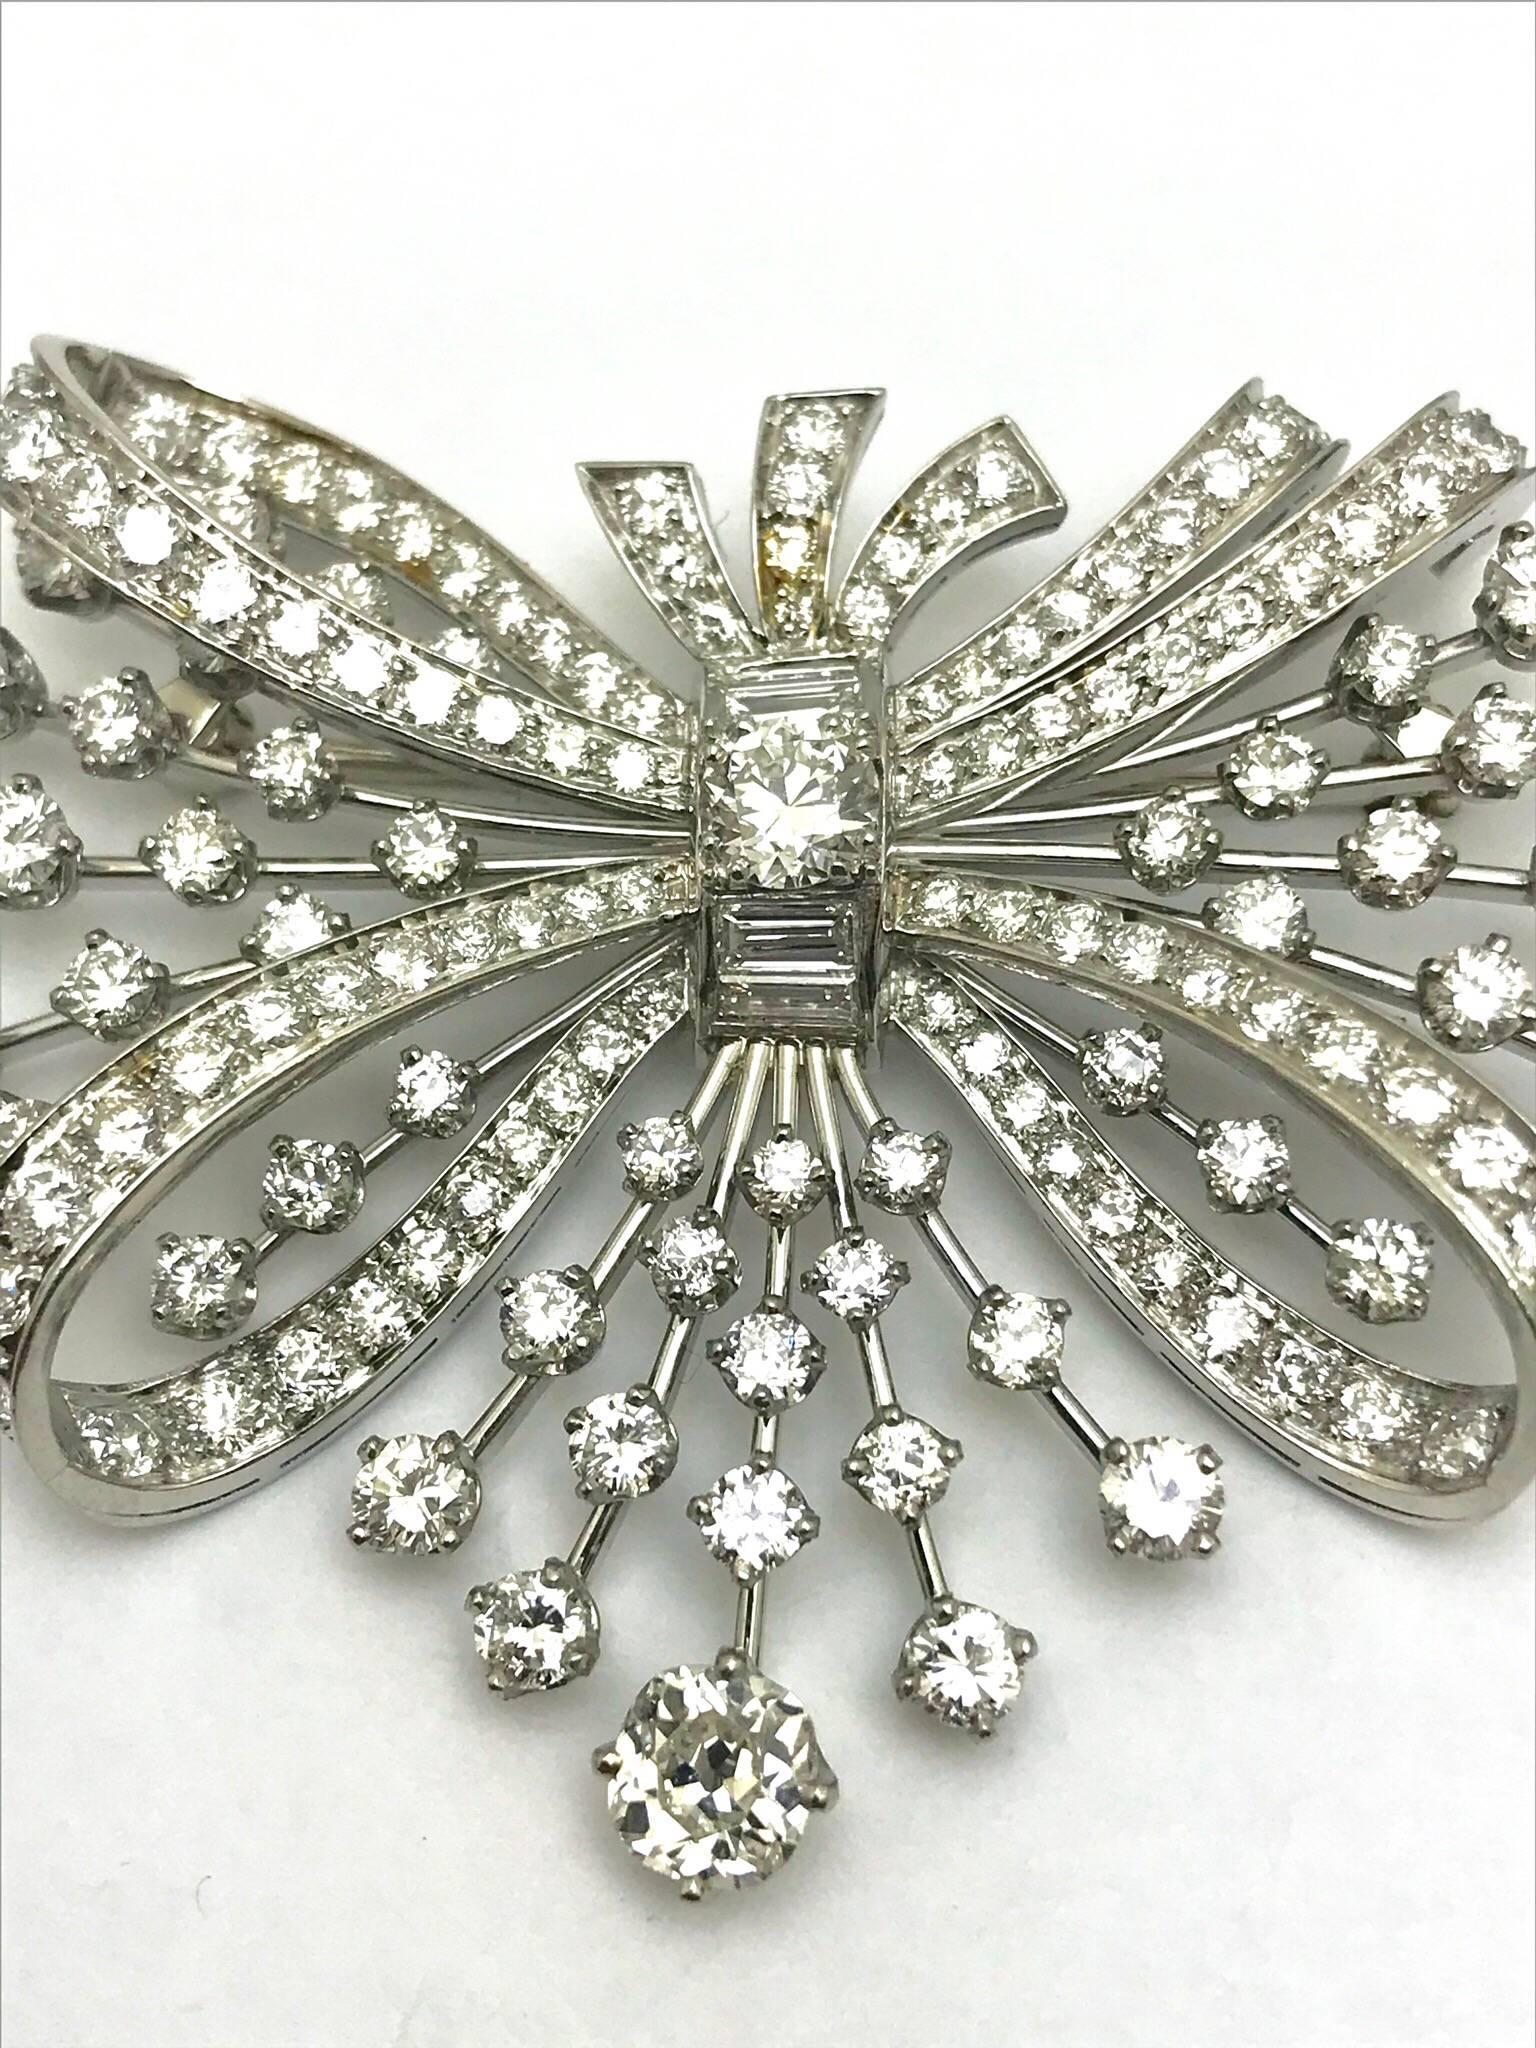 A 7.67 carats round and baguette diamond platinum spray bow brooch.  The bow has diamonds set throughout, and the spray has diamond spaced out on stems of platinum.  There are 151 round diamonds and four baguette diamonds, graded as G-I color, VS